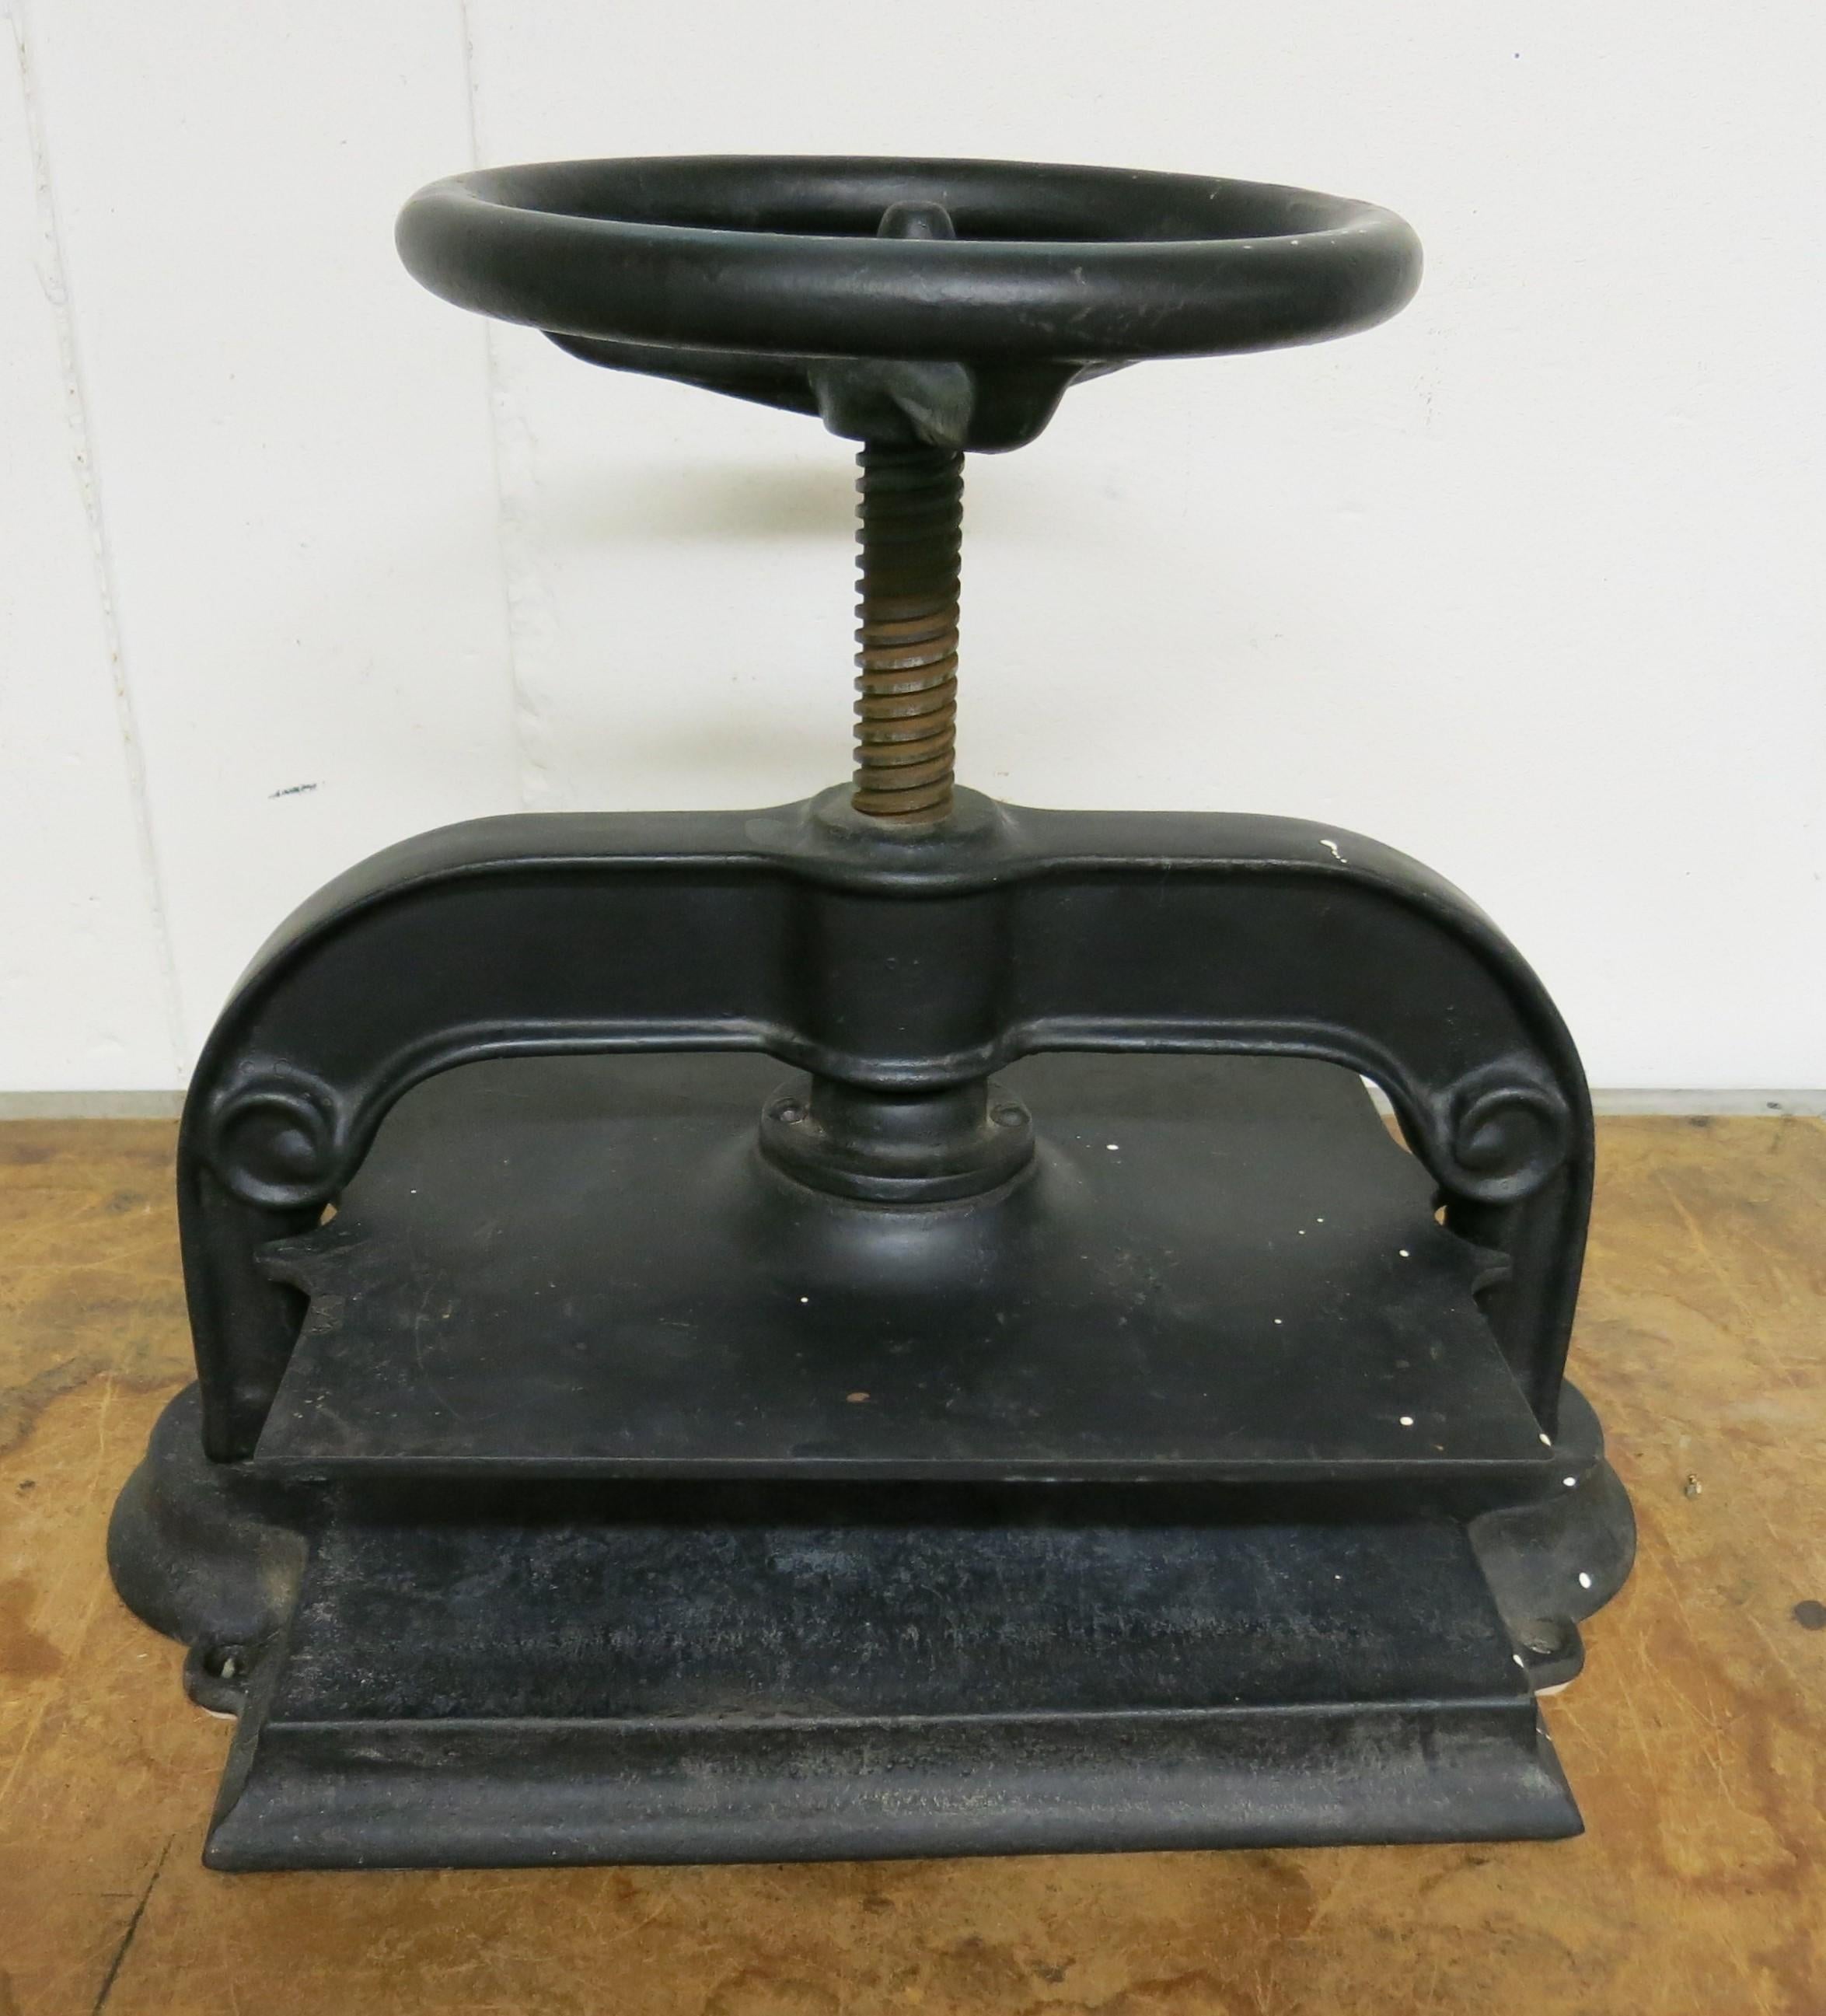 Antique cast iron book press, most likely Bradley and Hubbard. It is 19